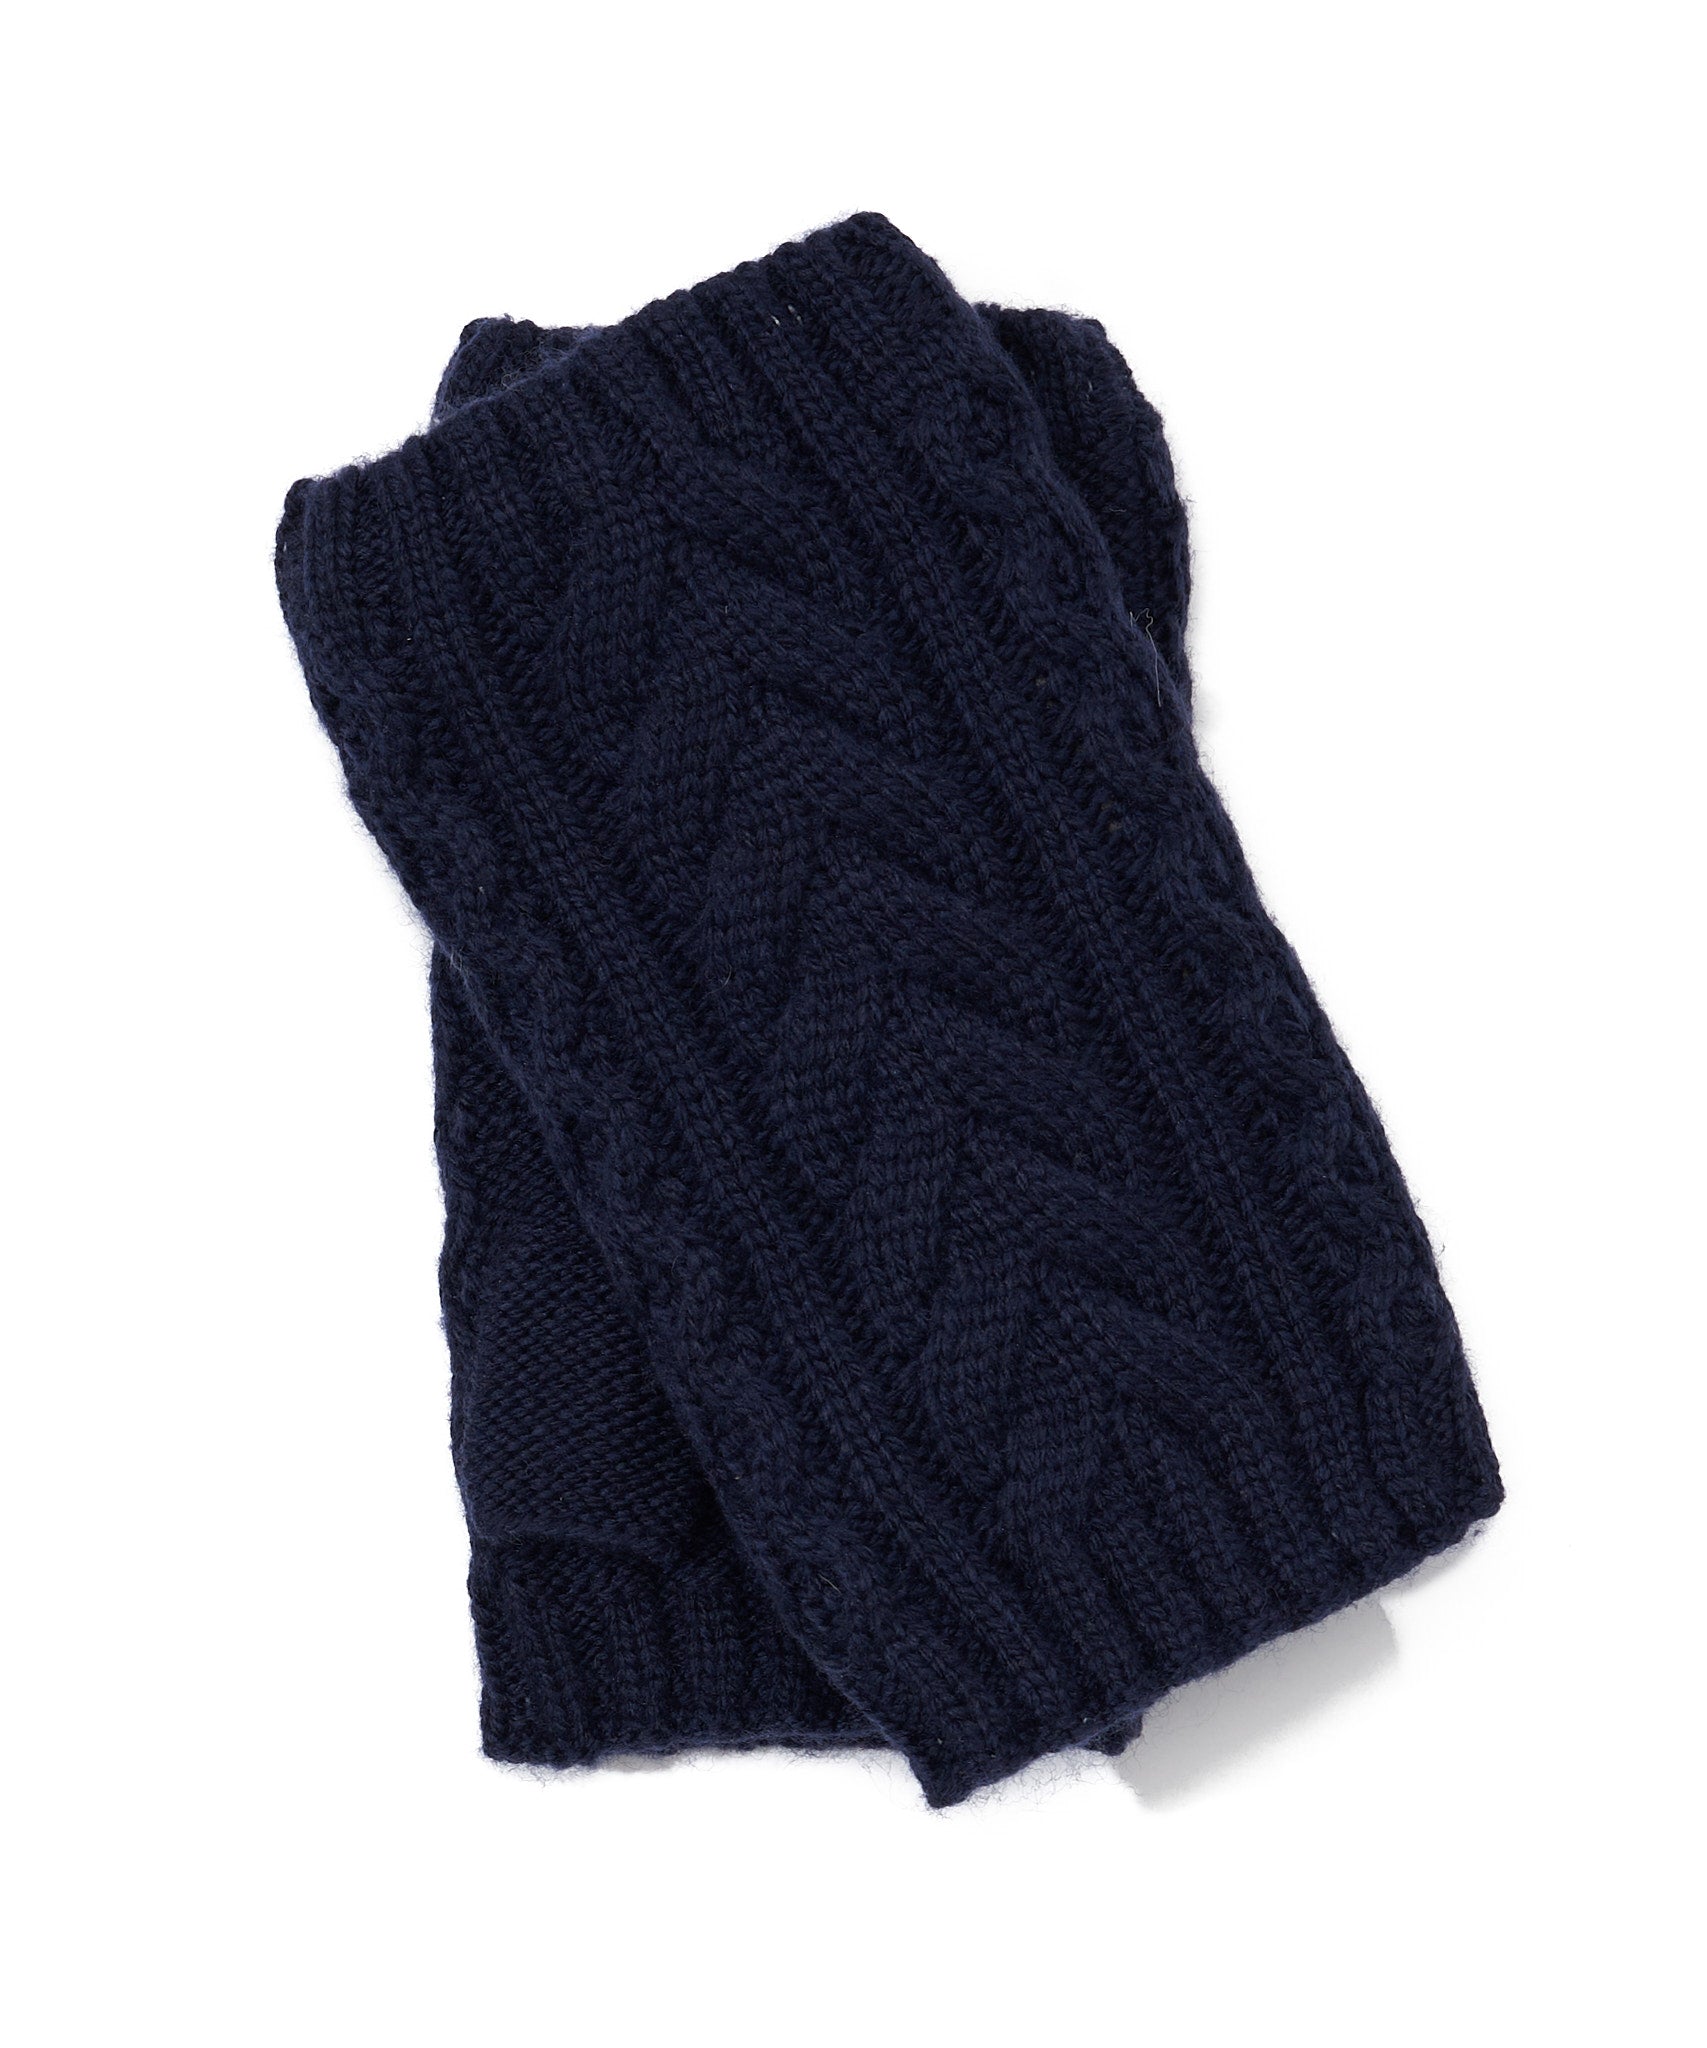 Recycled Wishbone Cable Handwarmer in color Navy